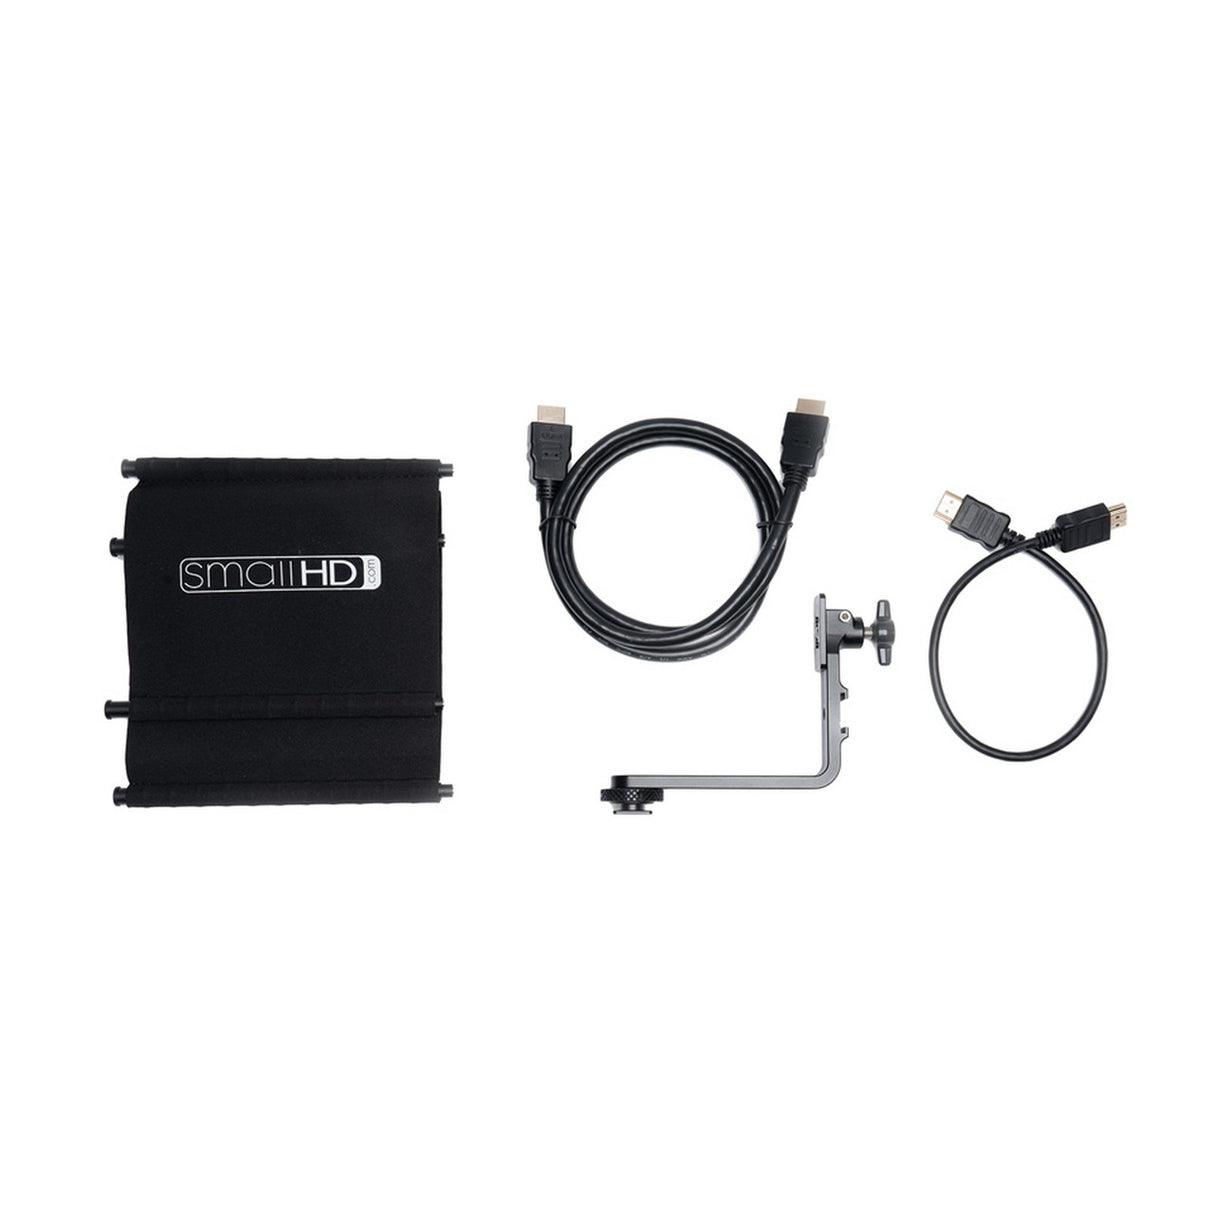 SmallHD ACC-FOCUS7-PACK FOCUS 7 Accessory Pack with Tilt Arm, Sunhood, Screen Protector and Cables